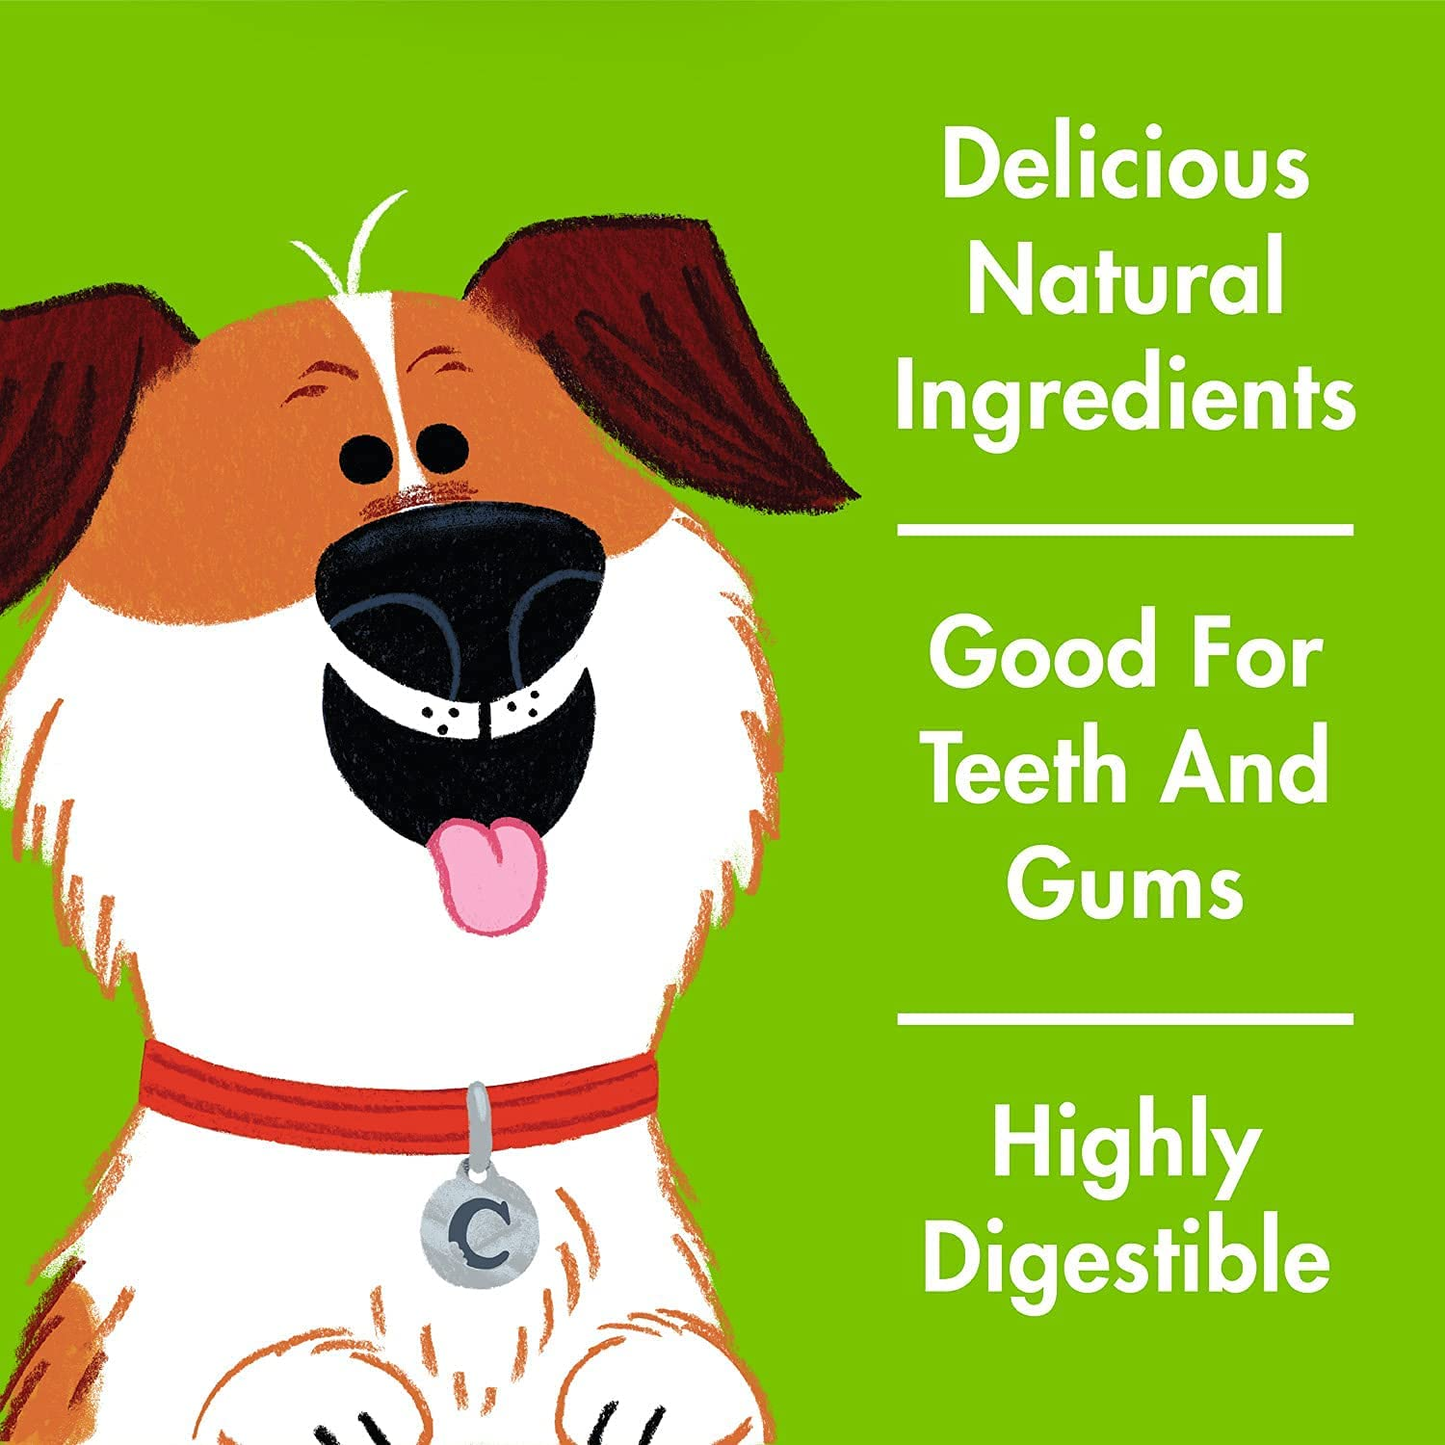 Chewsday Extra Small Minty Fresh Daily Dental Dog Chews, Made in the USA, Natural Highly-Digestible Oral Health Treats for Healthy Gums and Teeth - 28 Count